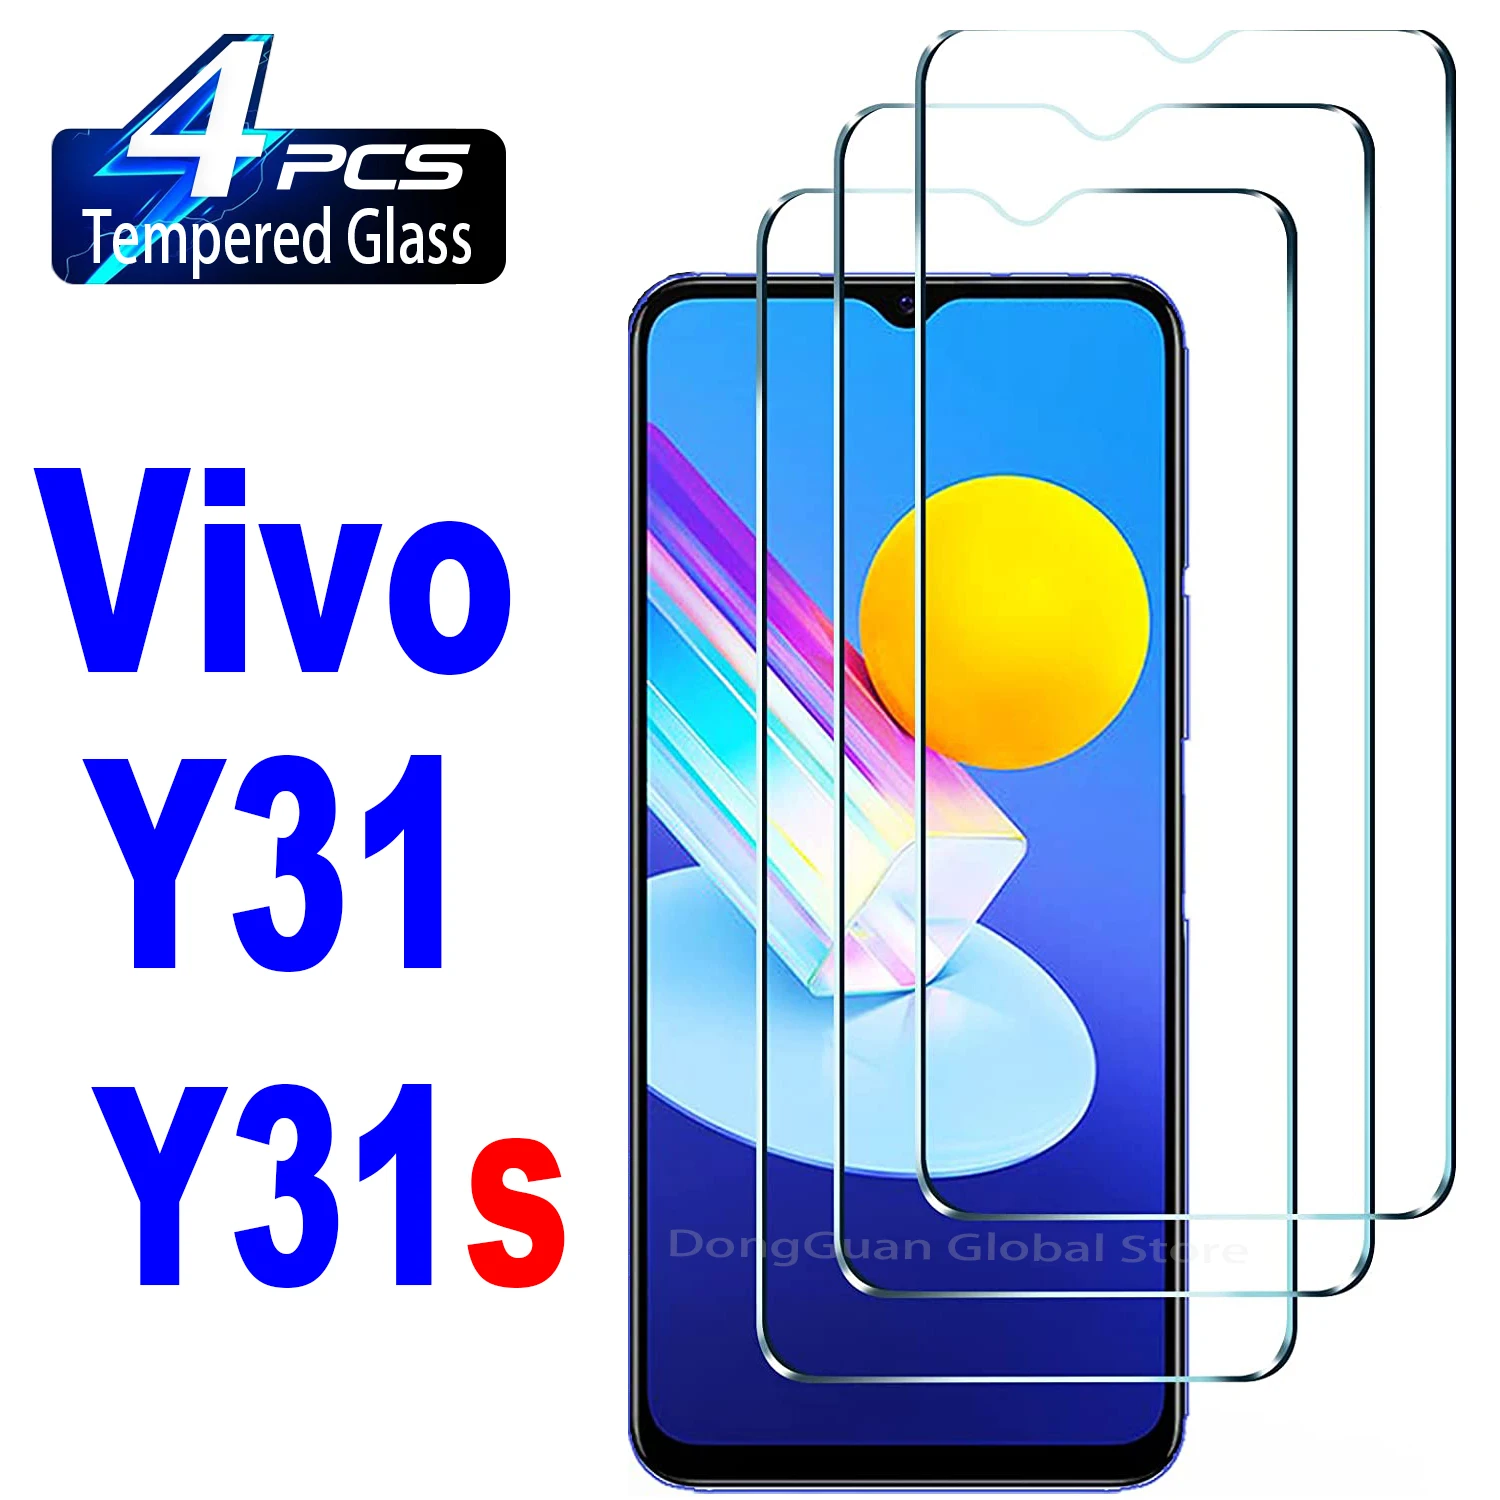 

2/4Pcs Tempered Glass For Vivo Y31 Y31s Screen Protector Glass Film